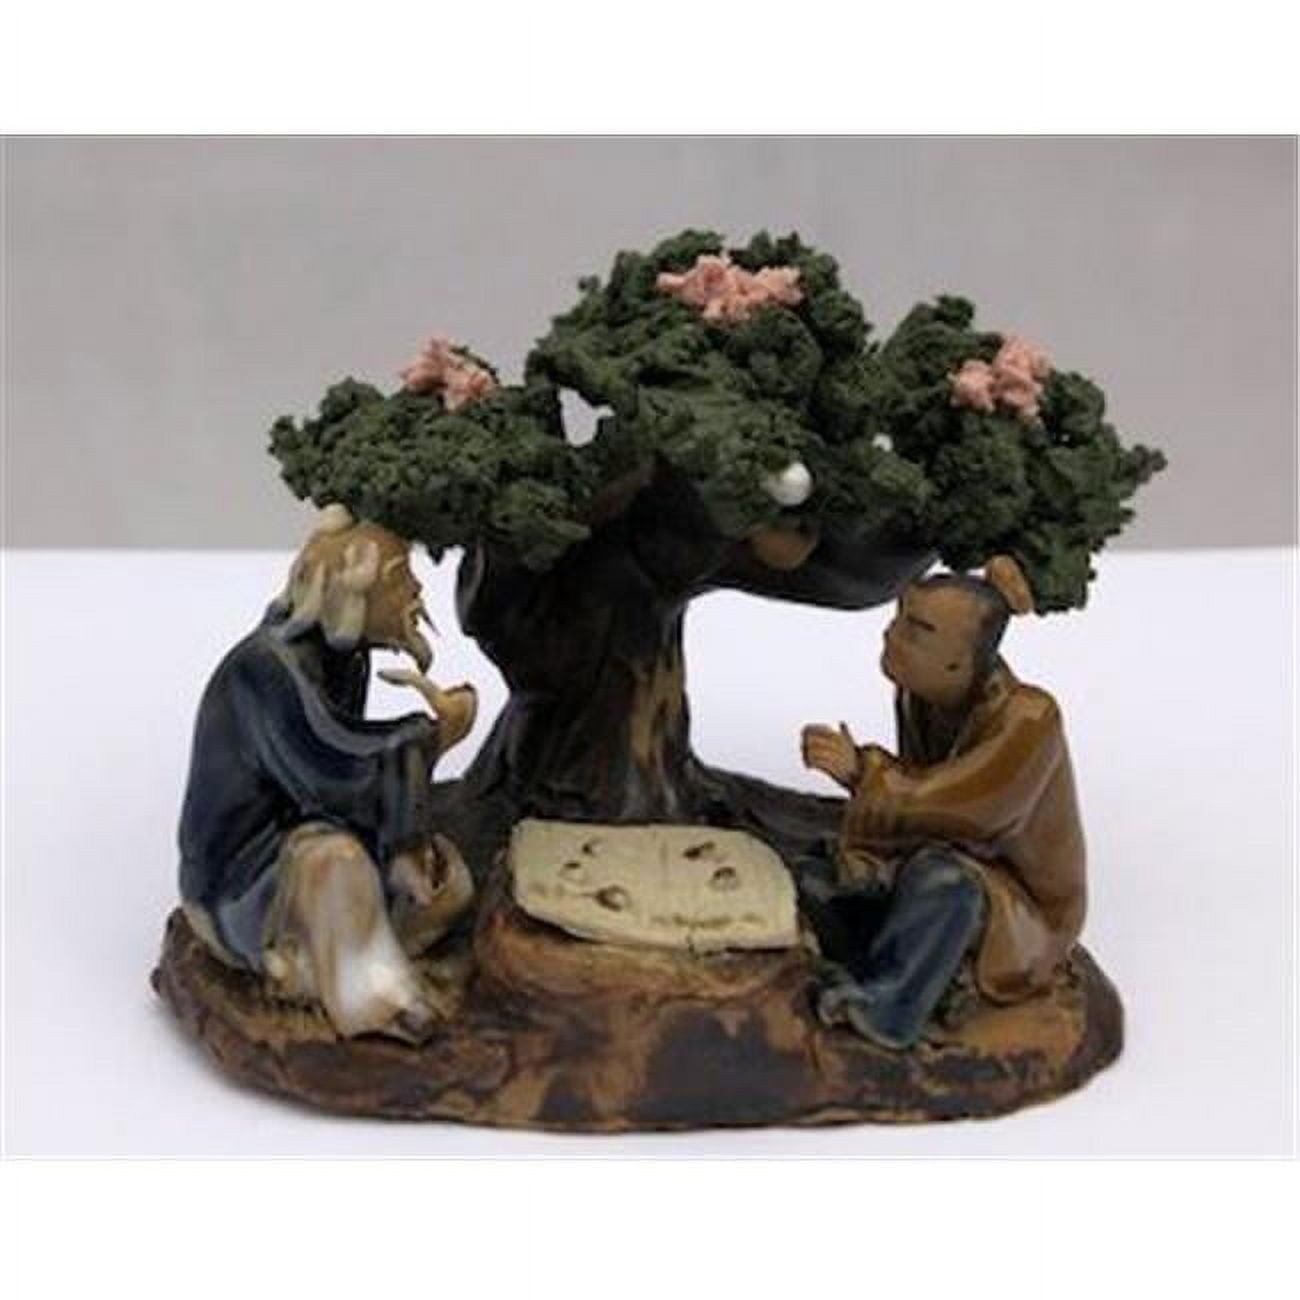 Picture of Bonsai Boy e3291 Ceramic Figurine - Two Men Playing Board Game Under A Tree